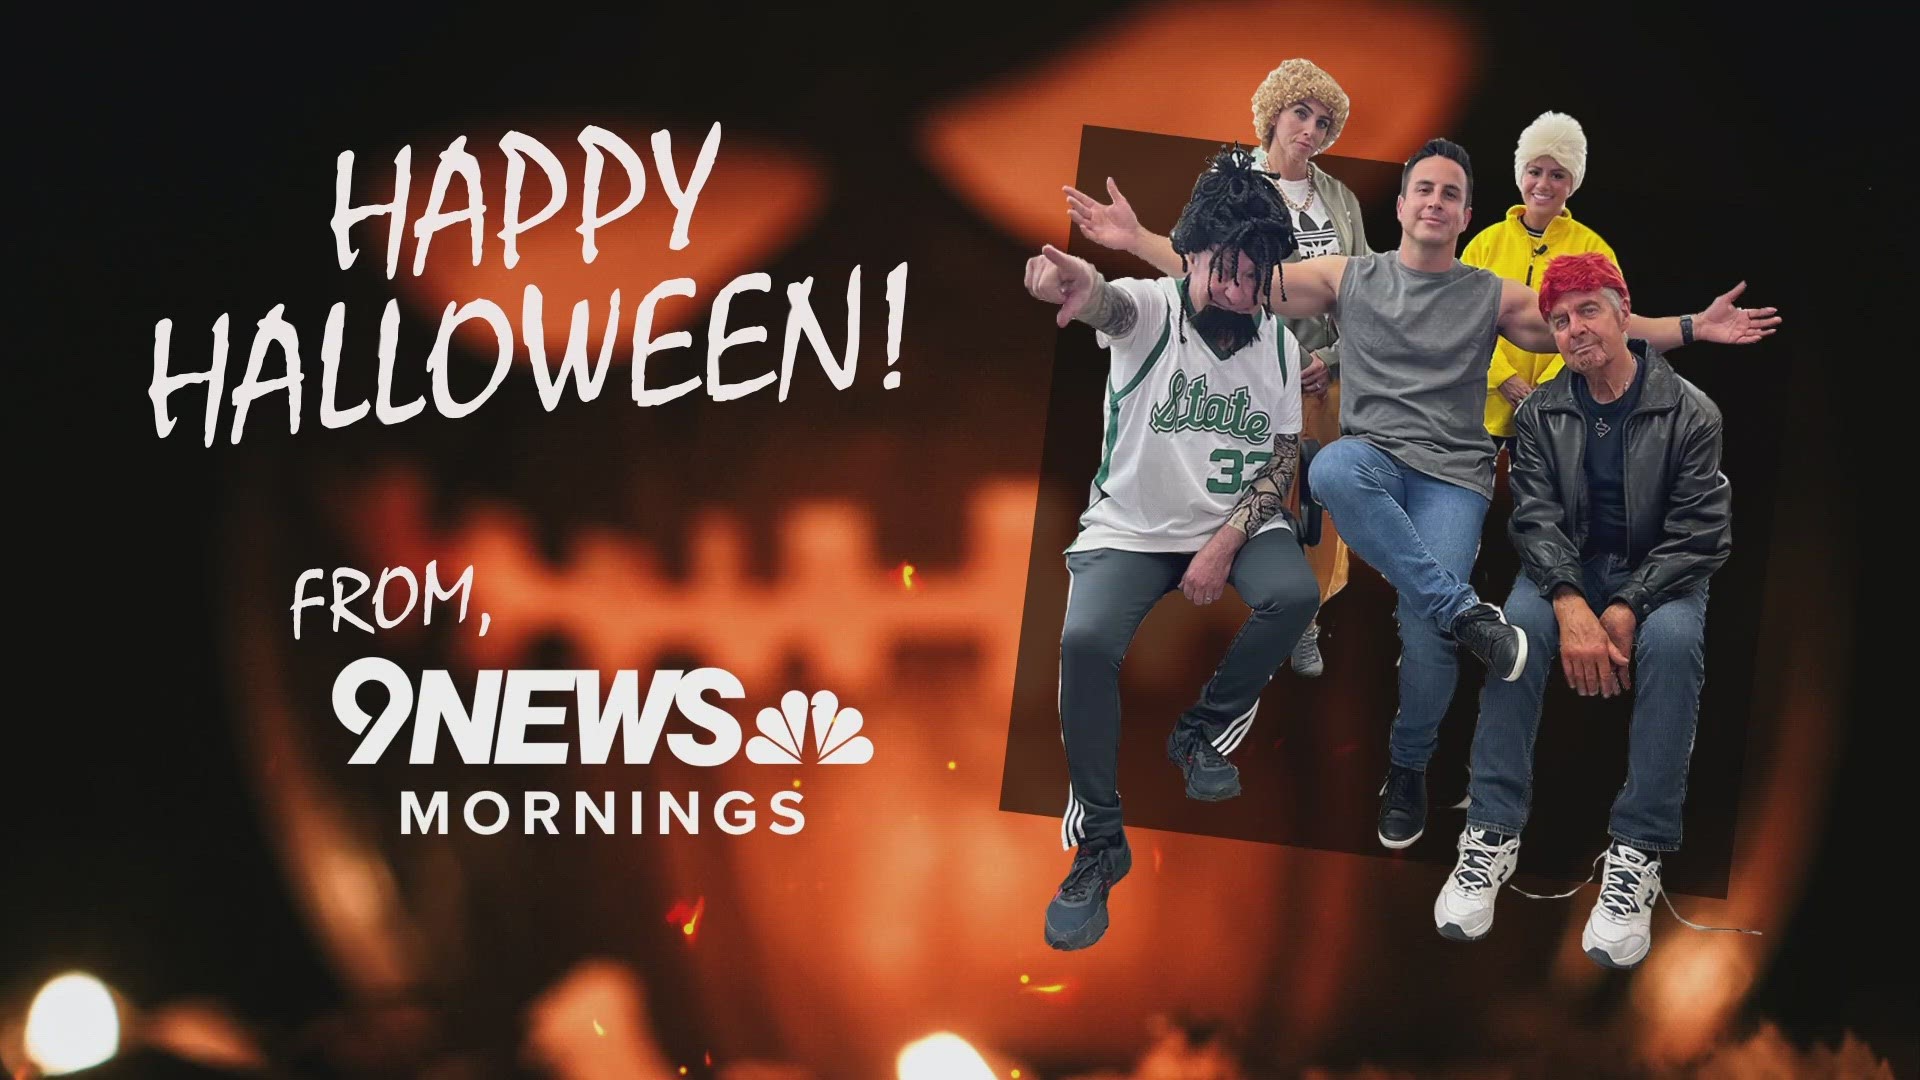 The 9NEWS Morning team channeled their inner NSYNC for Halloween this year.